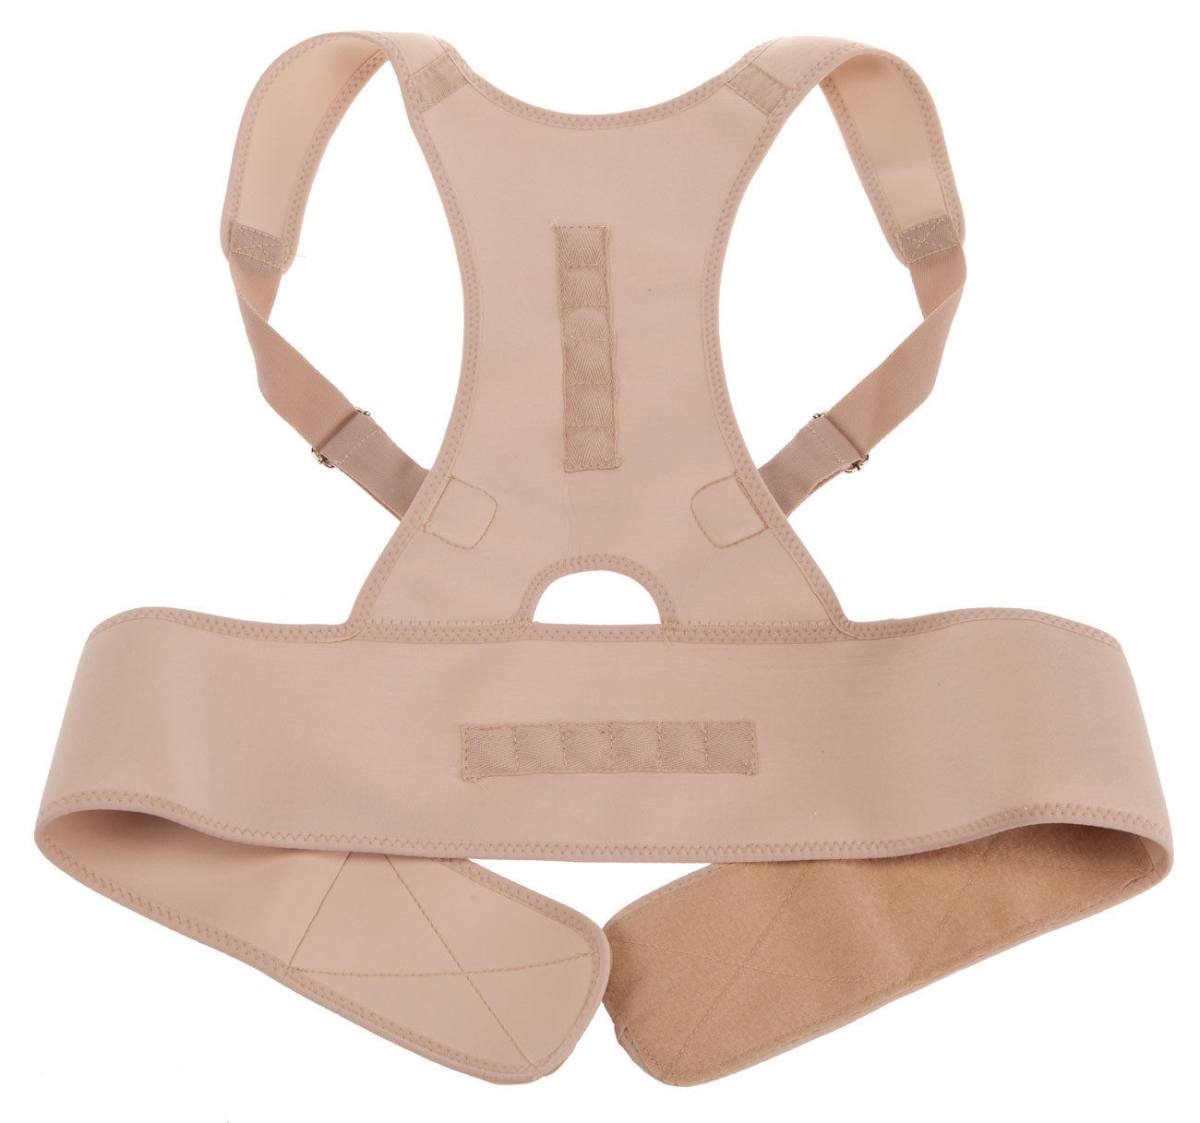 Zb6861xl North American Magnetic Posture Corrector In Extra Large